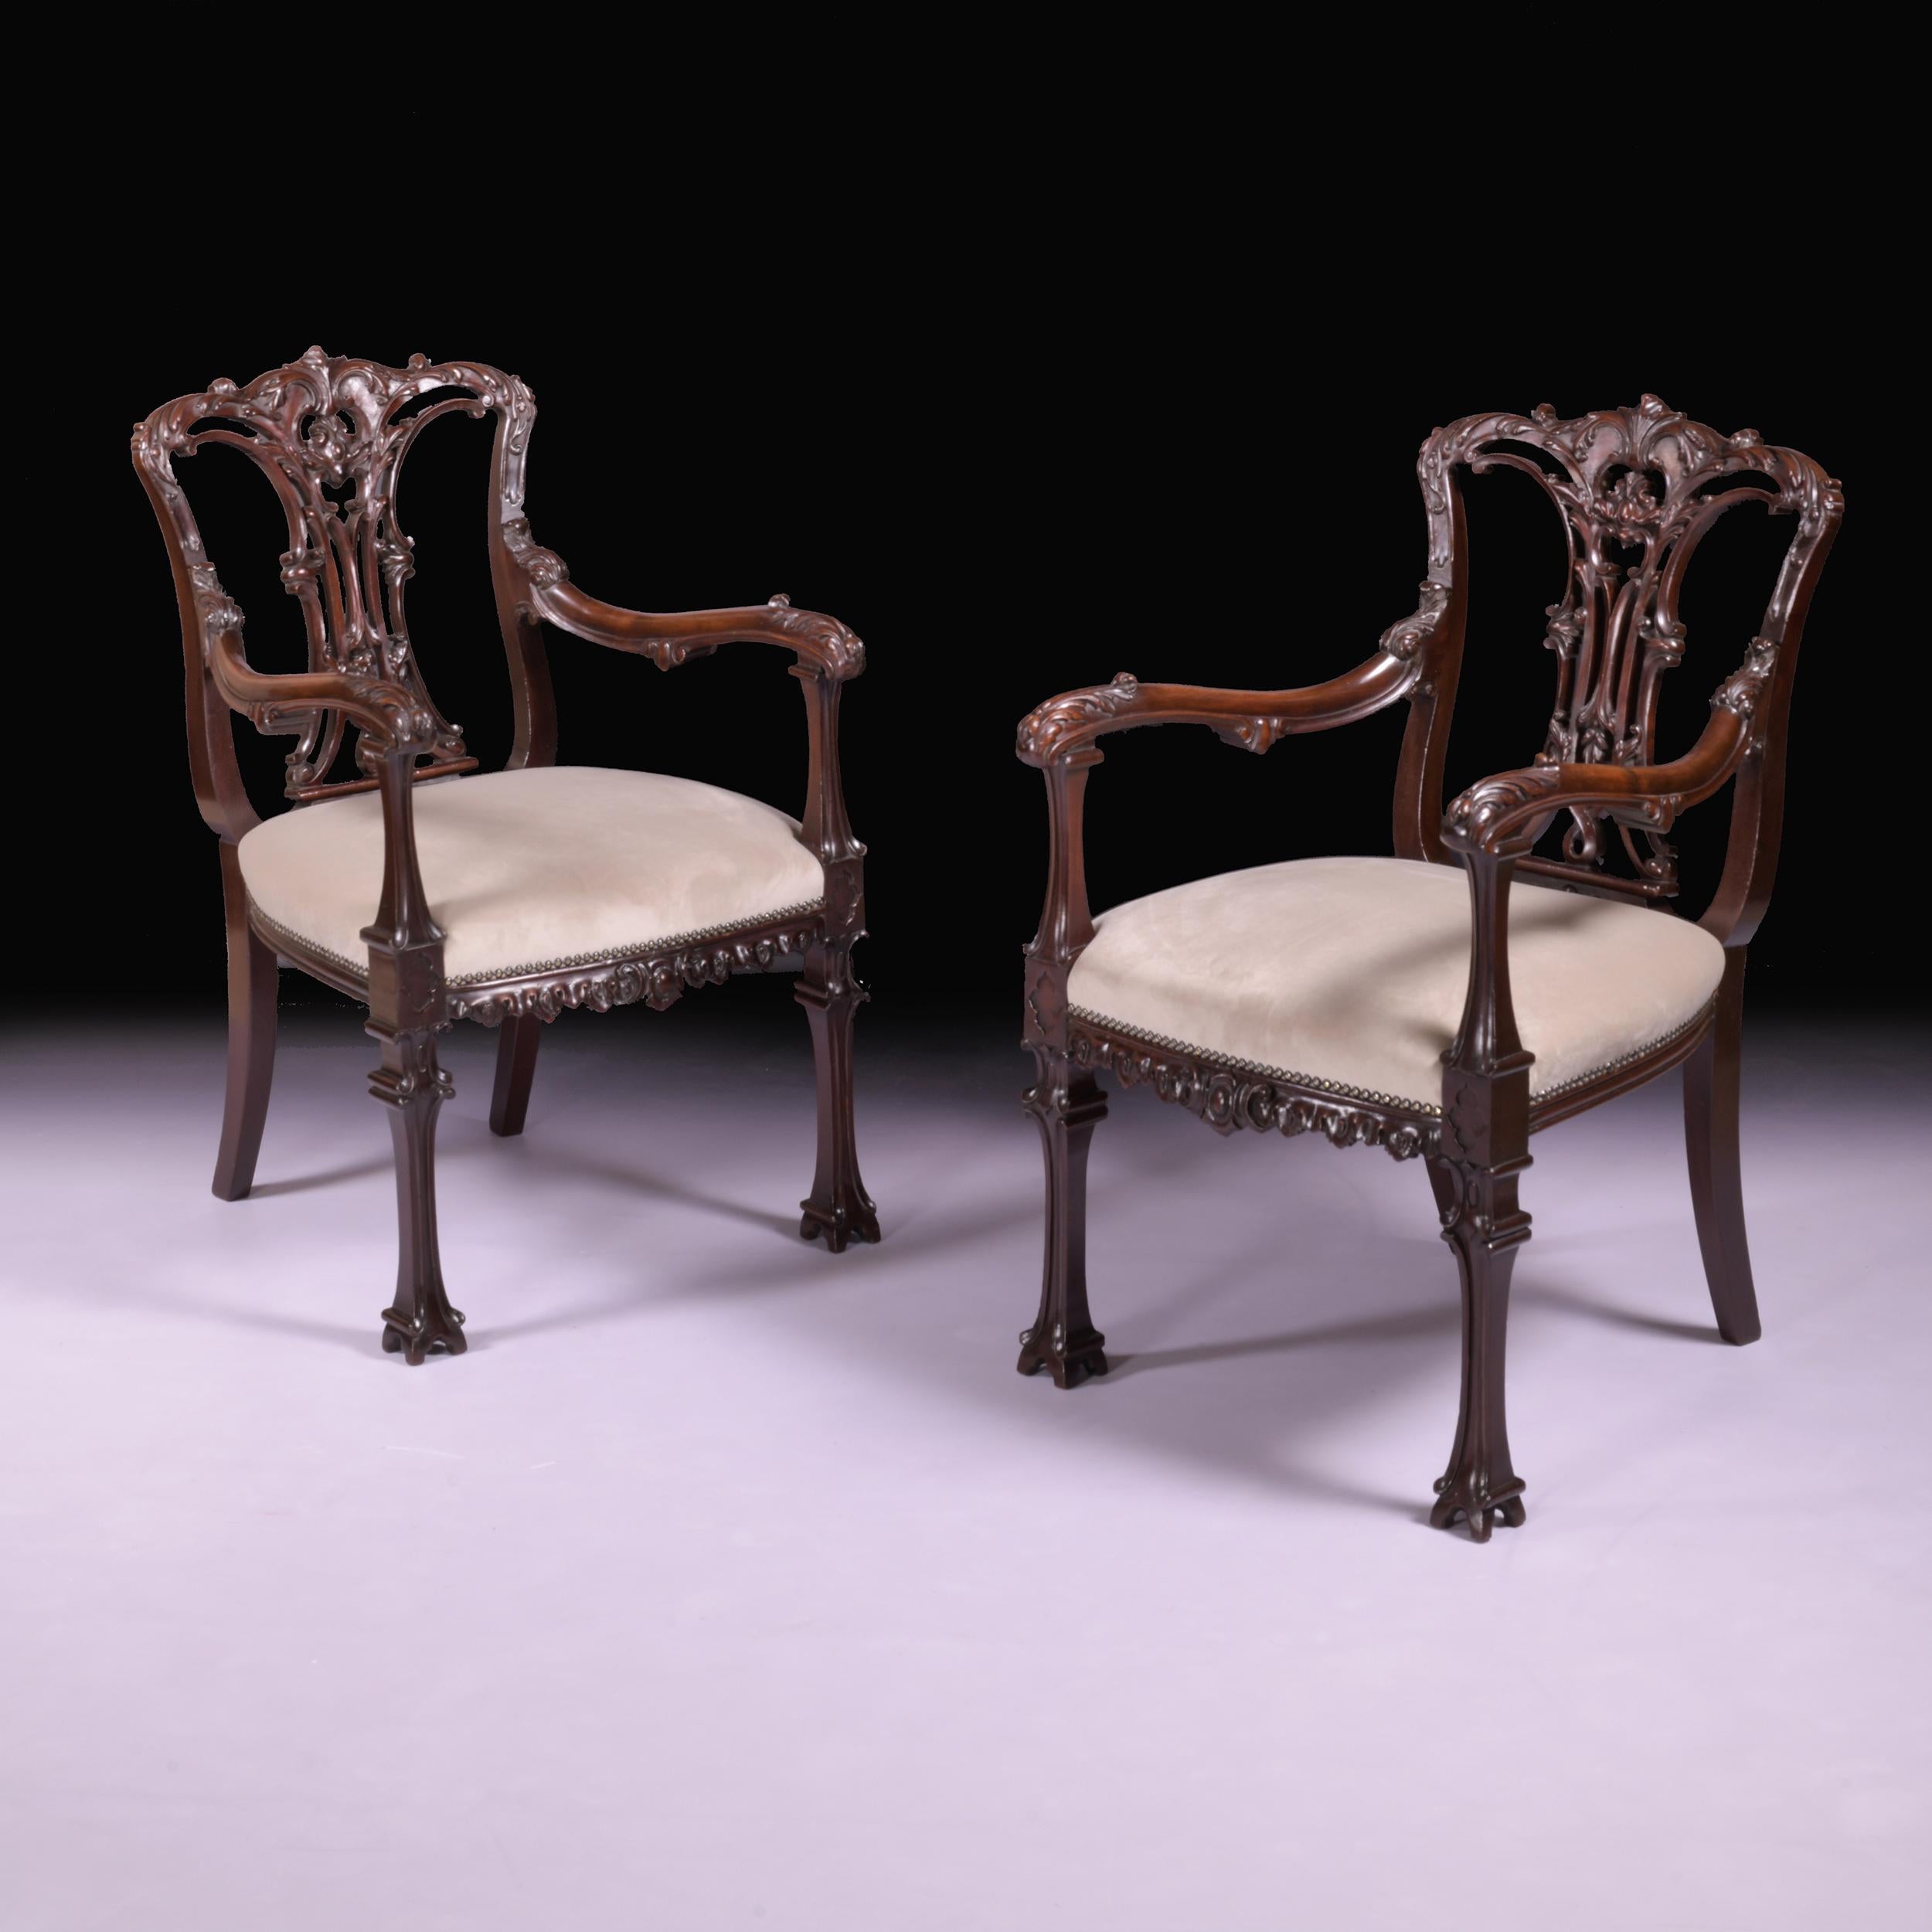 Fabric Pair Of 19th Century English Armchairs In The Chinese Chippendale Style For Sale